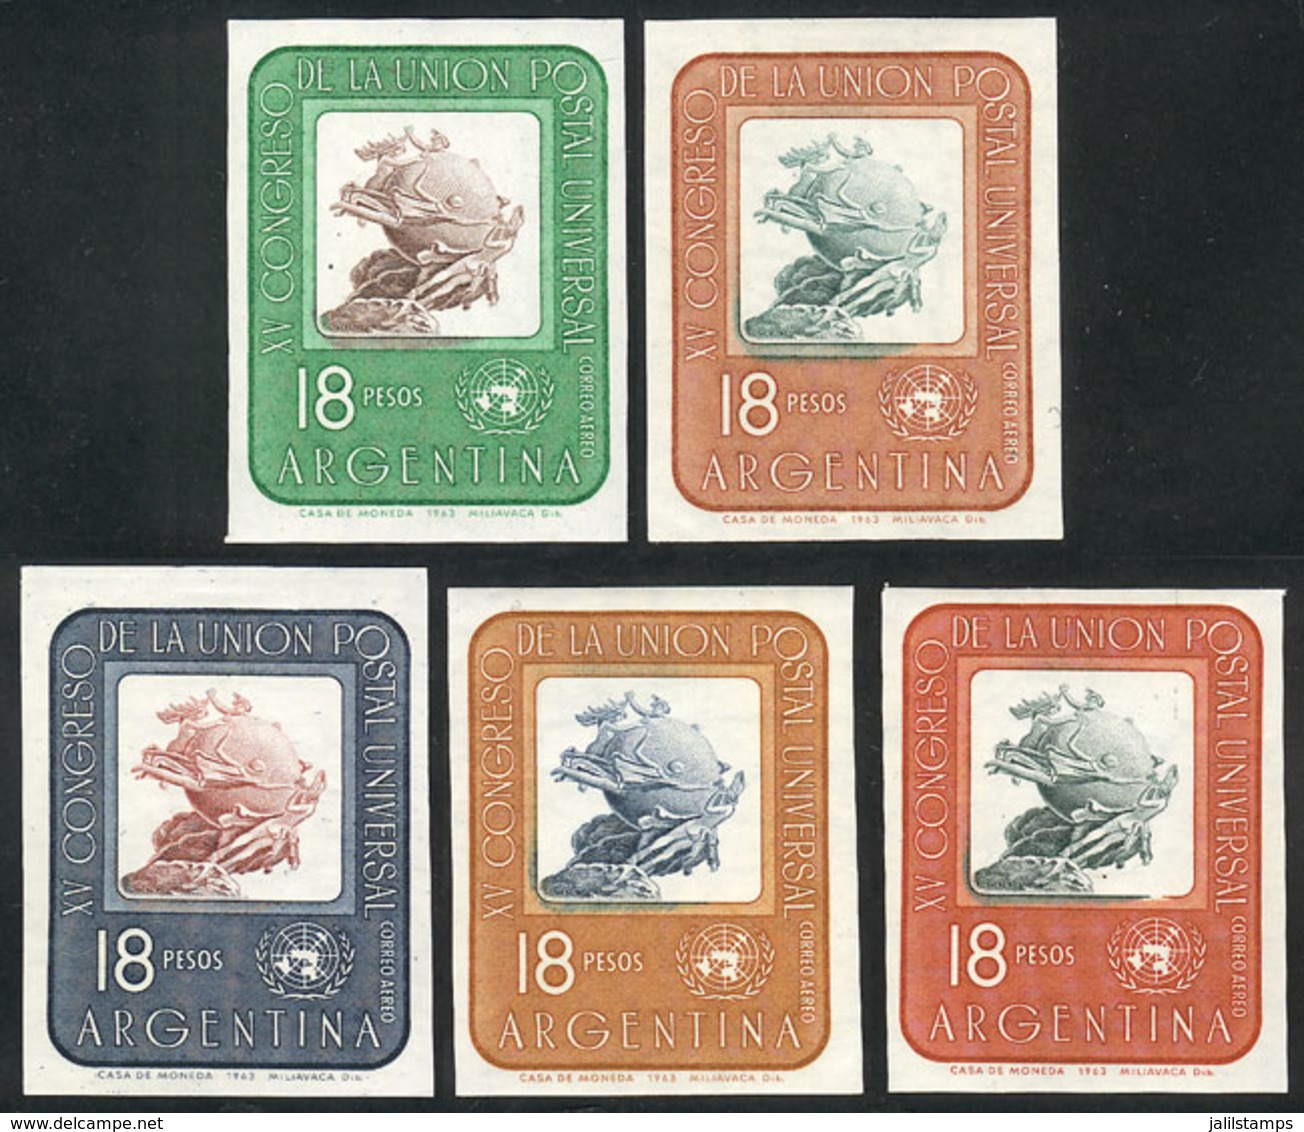 ARGENTINA: GJ.1278, 1964 UPU Congress, 5 Imperforate TRIAL COLOR PROOFS, Printed On Gummed Paper With Watermark, VF Qual - Posta Aerea